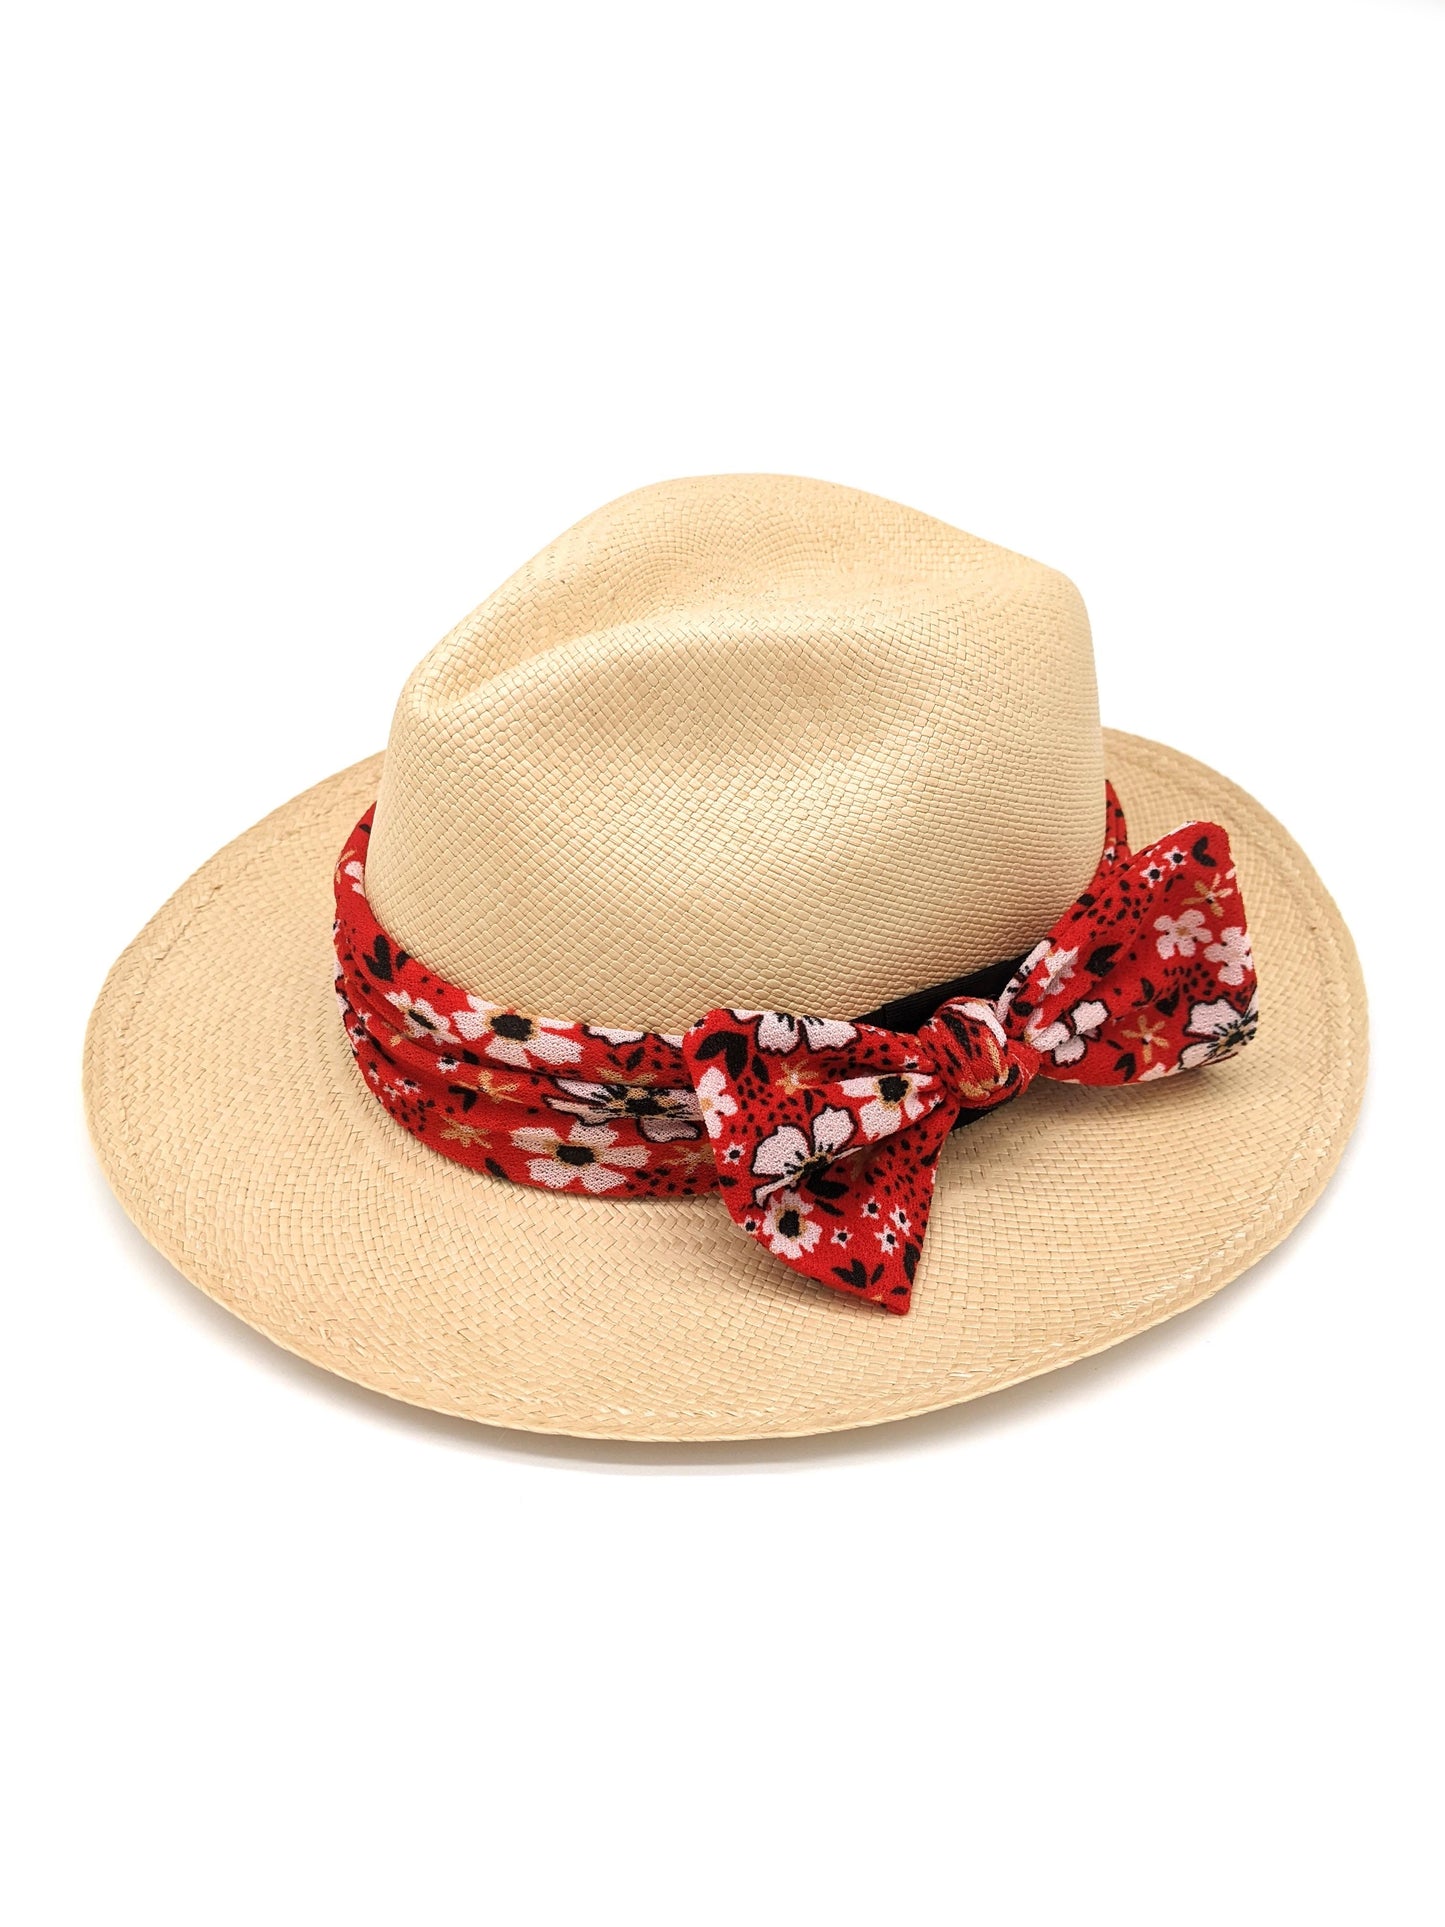 Interchangeable Panama Band - Red Bow